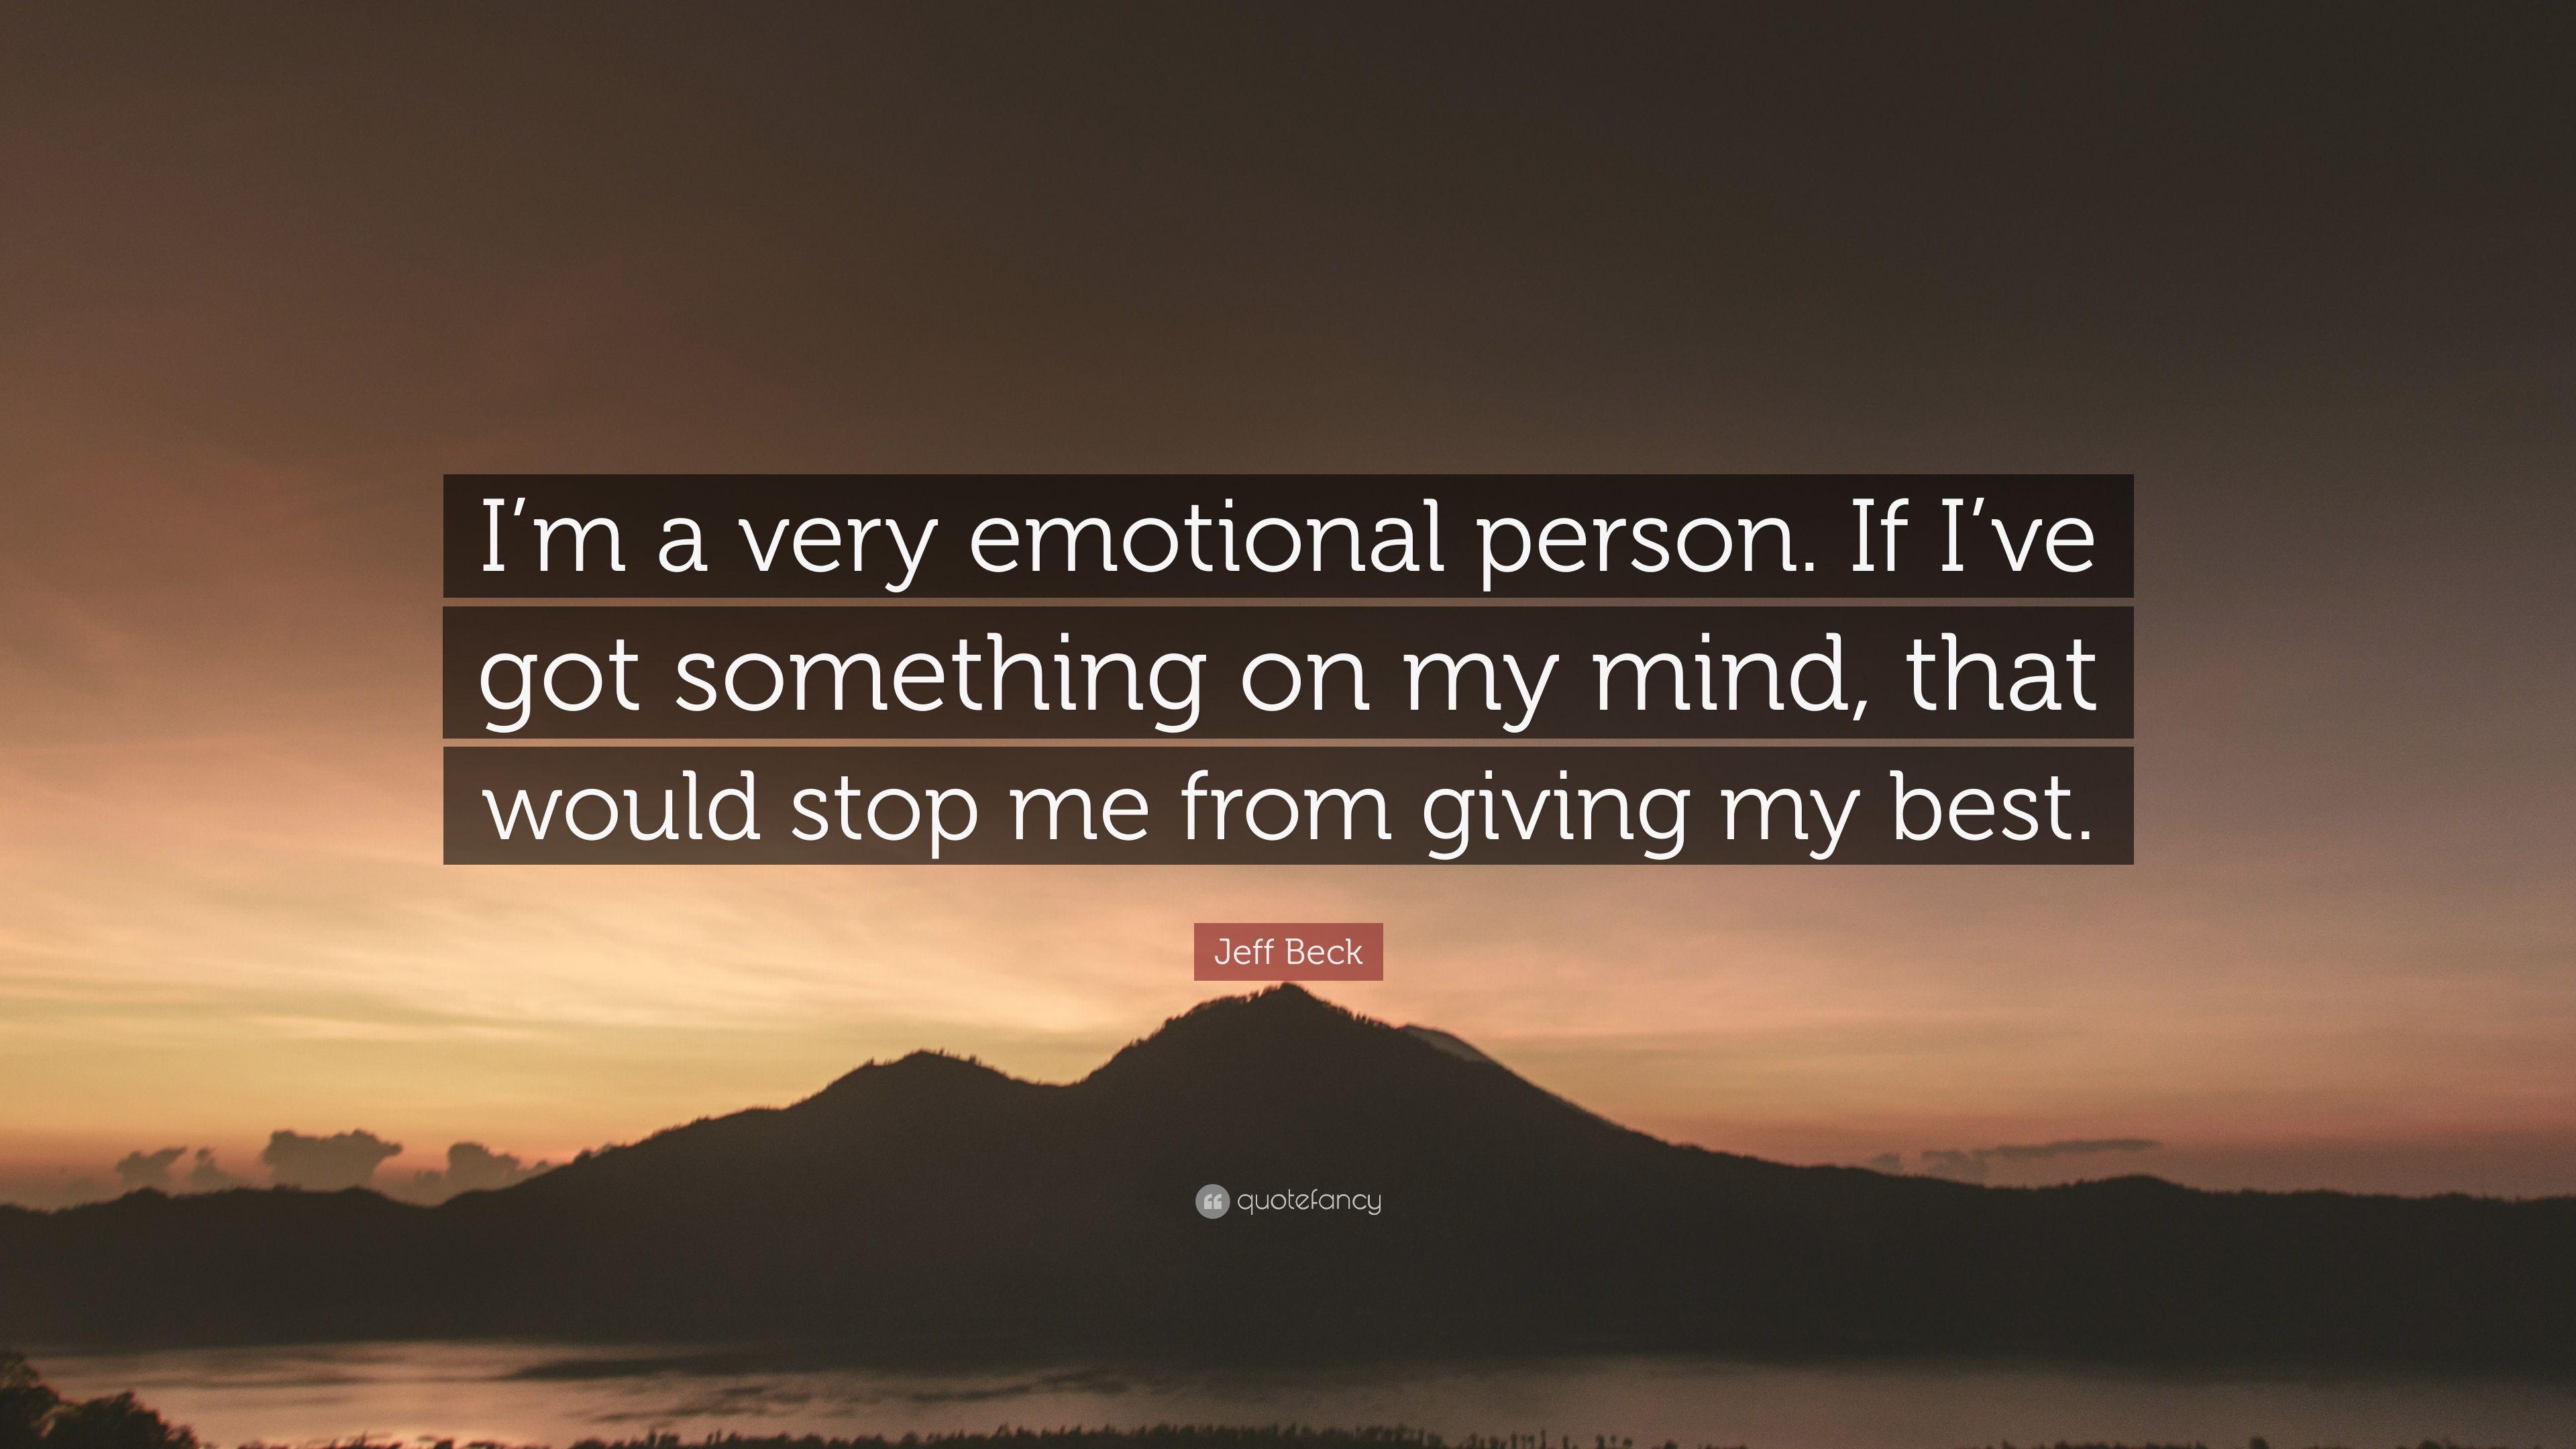 Jeff Beck Quote: “I'm a very emotional person. If I've got something